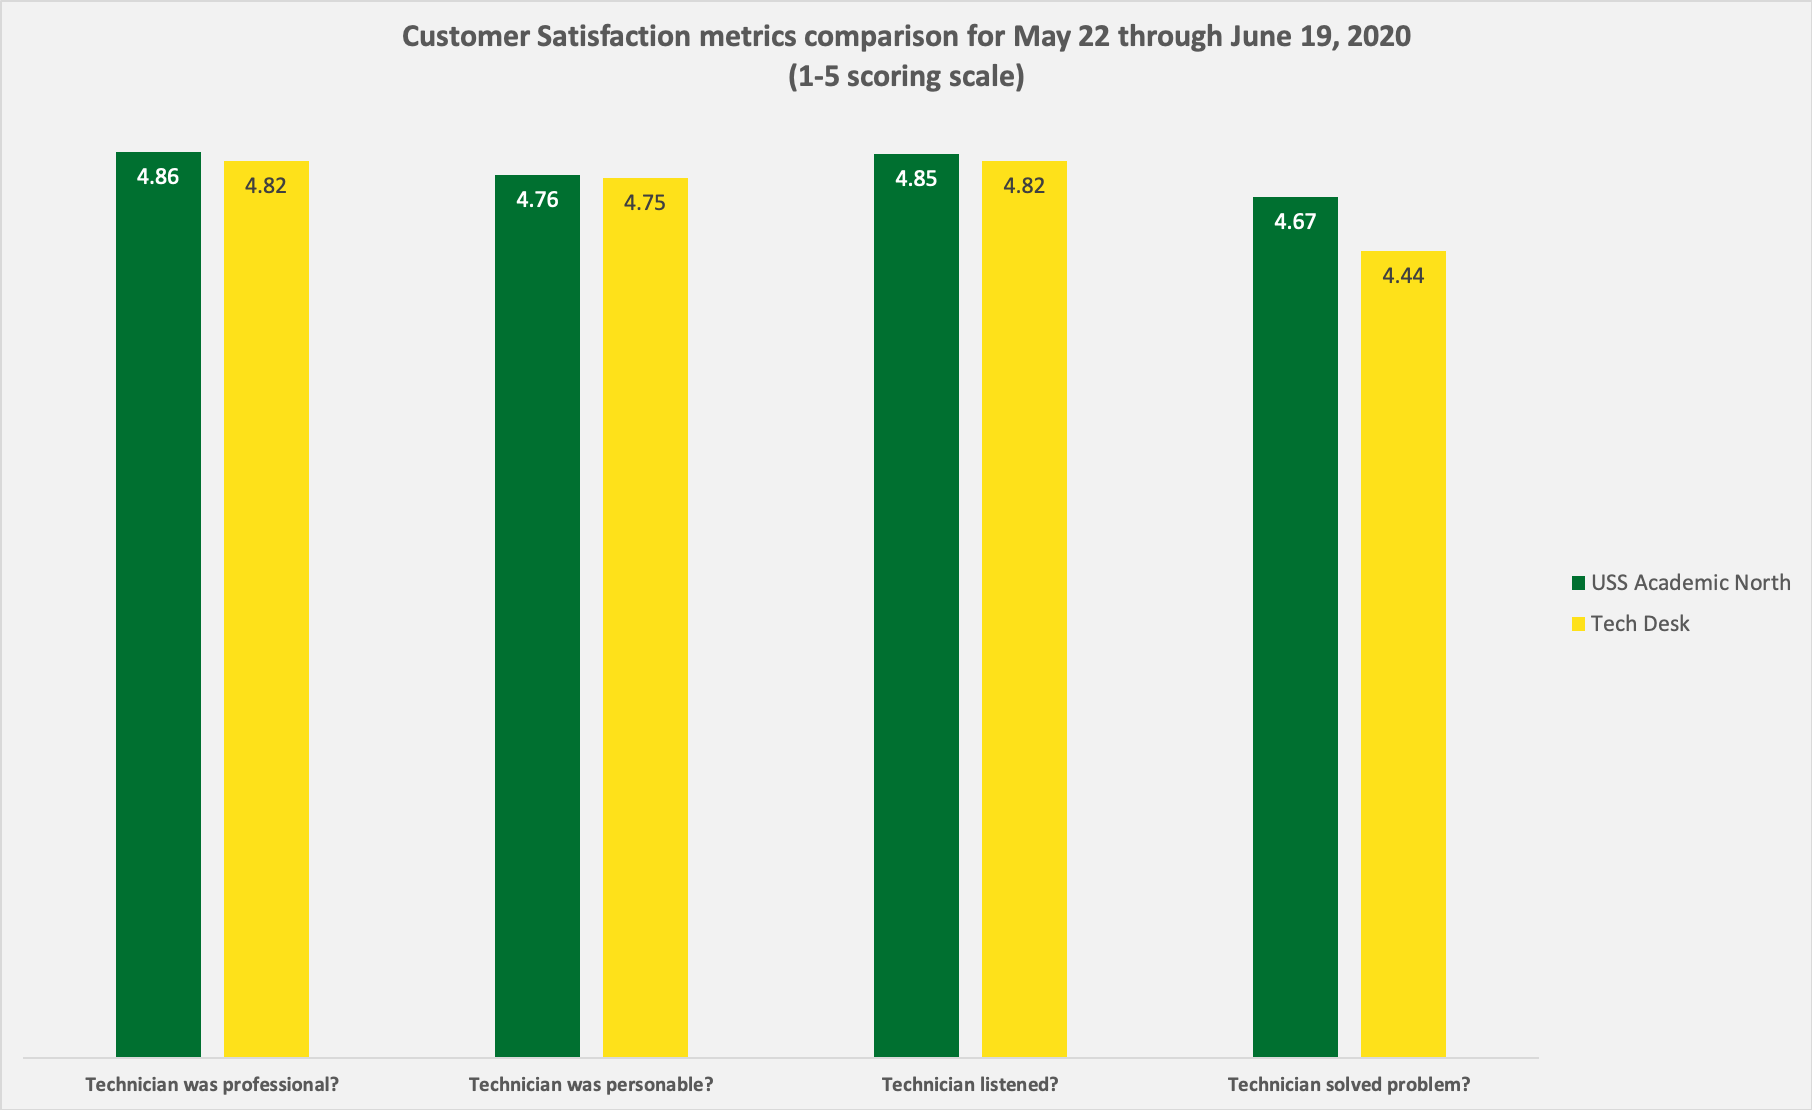 Column chart that shows customer satisfaction metrics for USS Academic North compared to Tech Desk